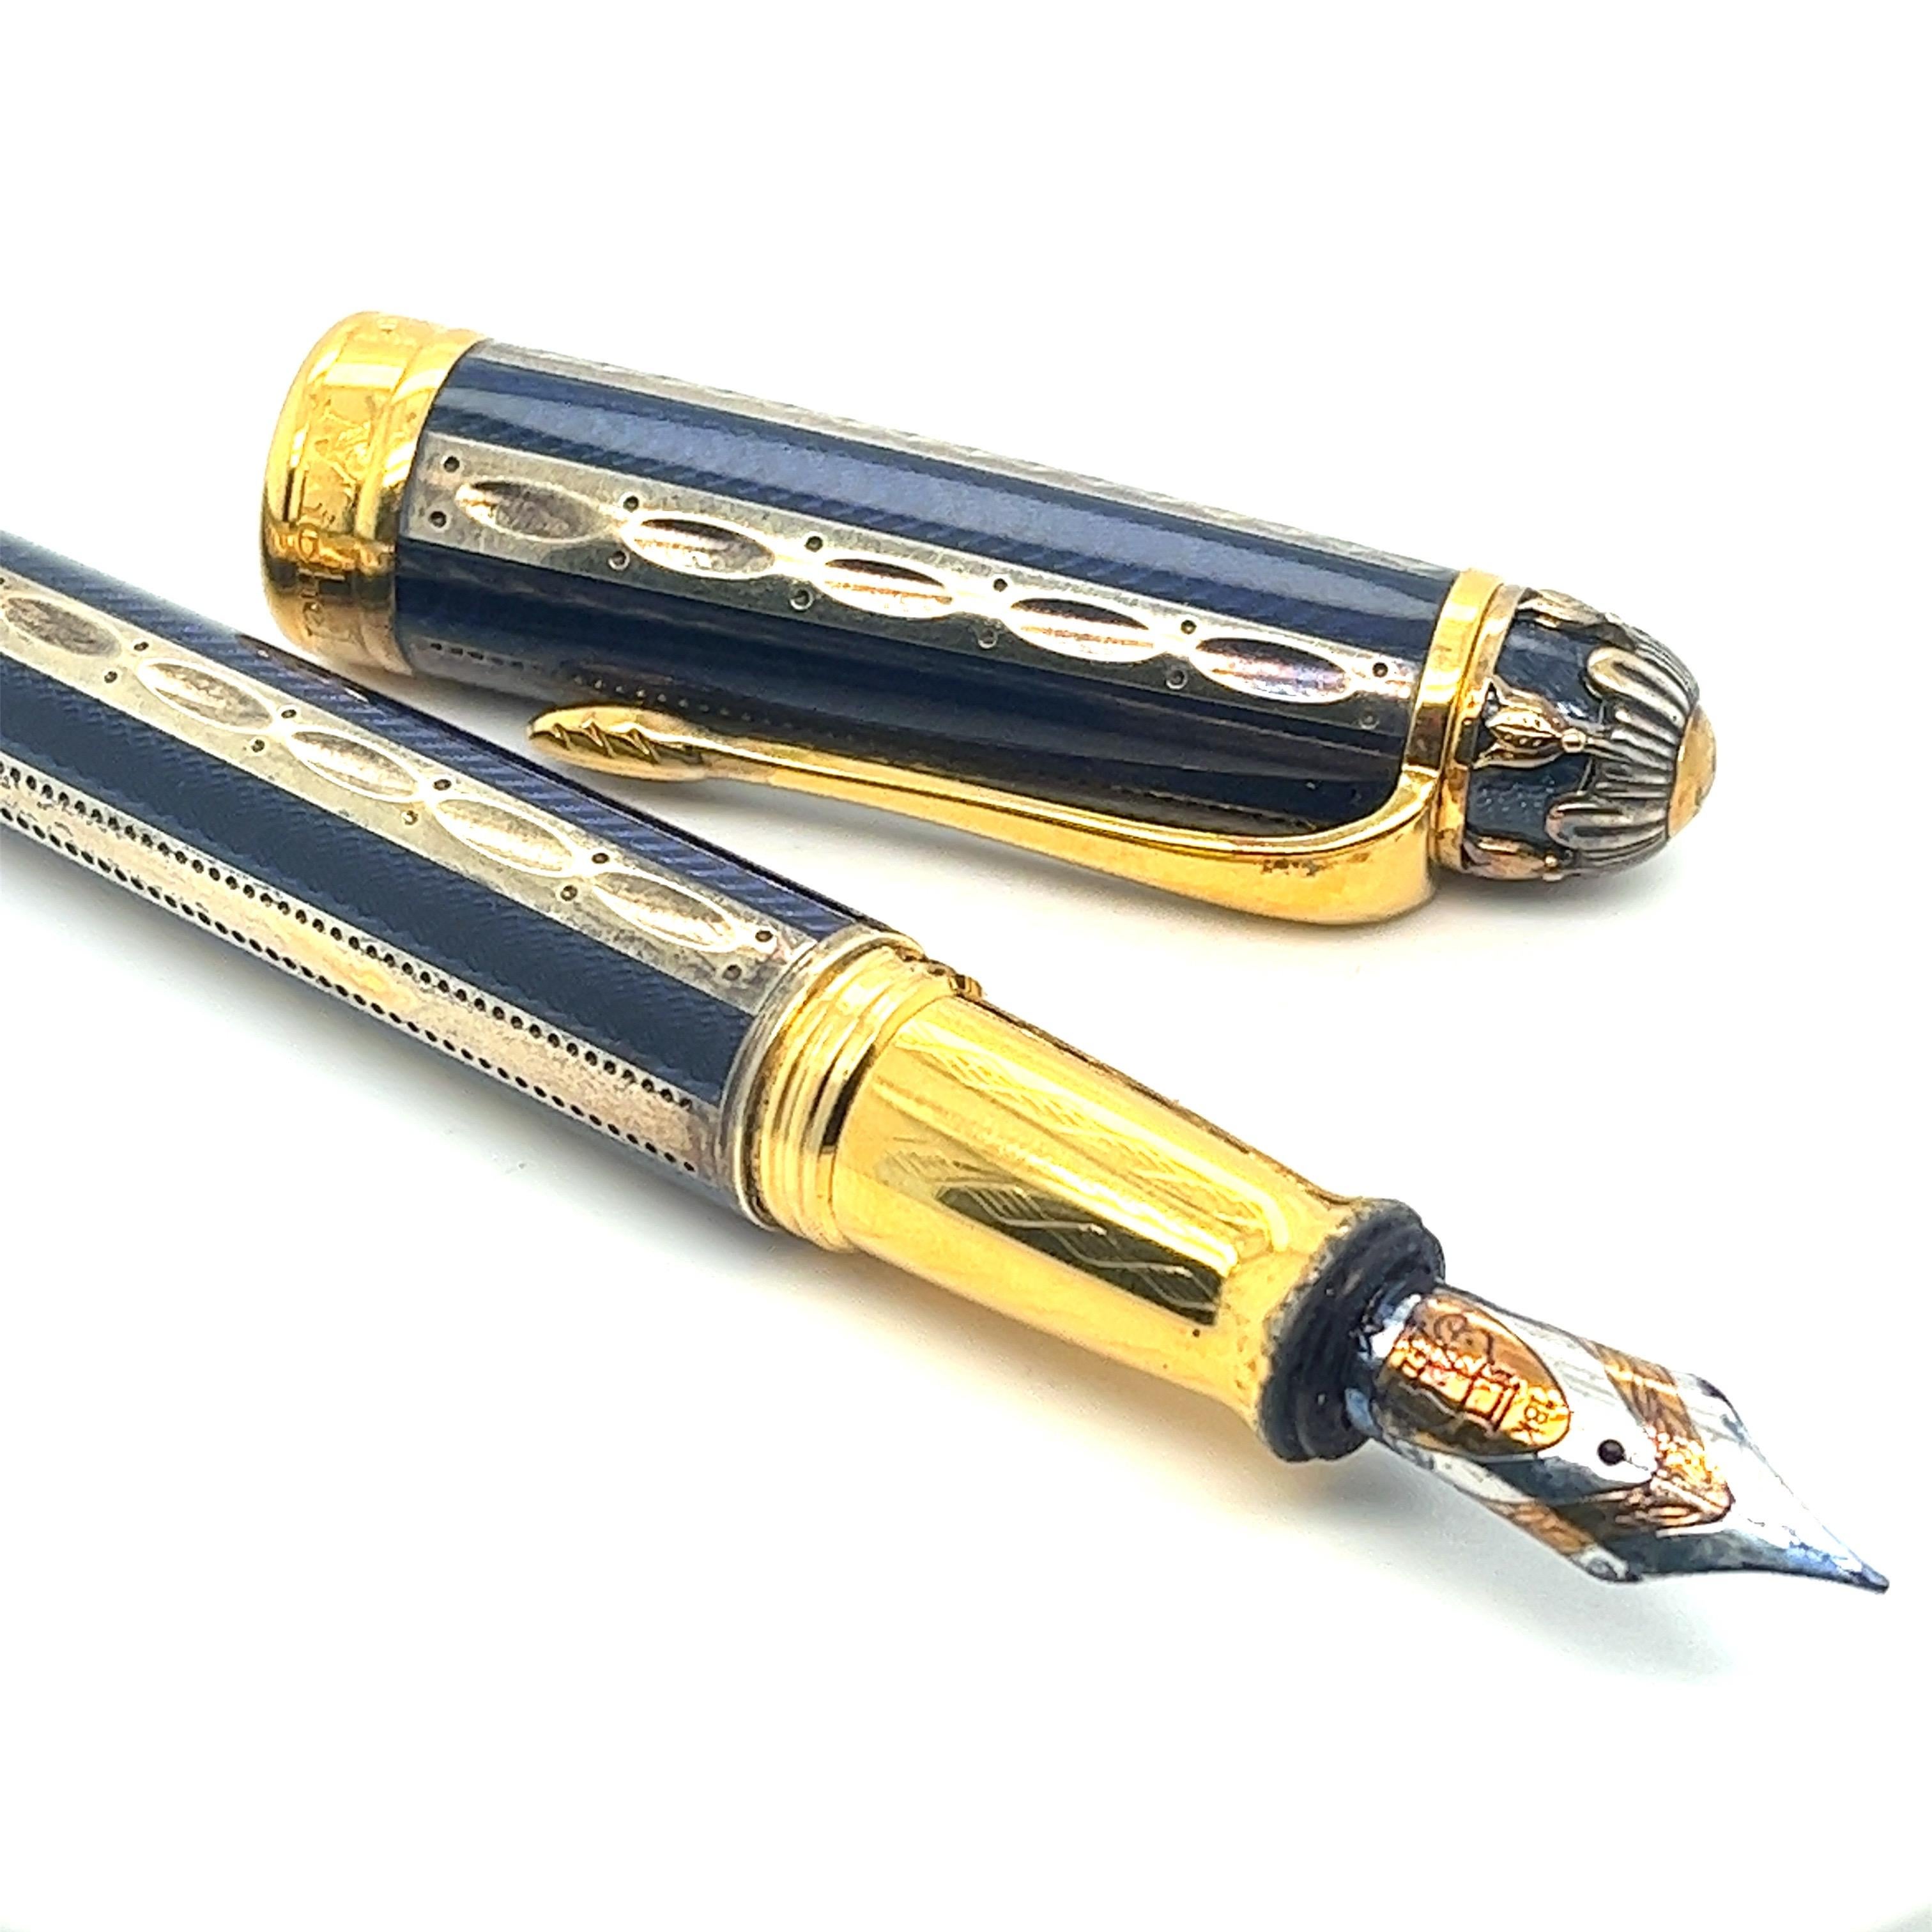 Offered here is a Michel Perchin Pen.

Sterling silver gilt and enamel fountain pen, made in Germany. 0728/4321.

in great condition, intriguing decorations and Imperial Russian ribbed blue enamel.
Just like the imperial faberge eggs.